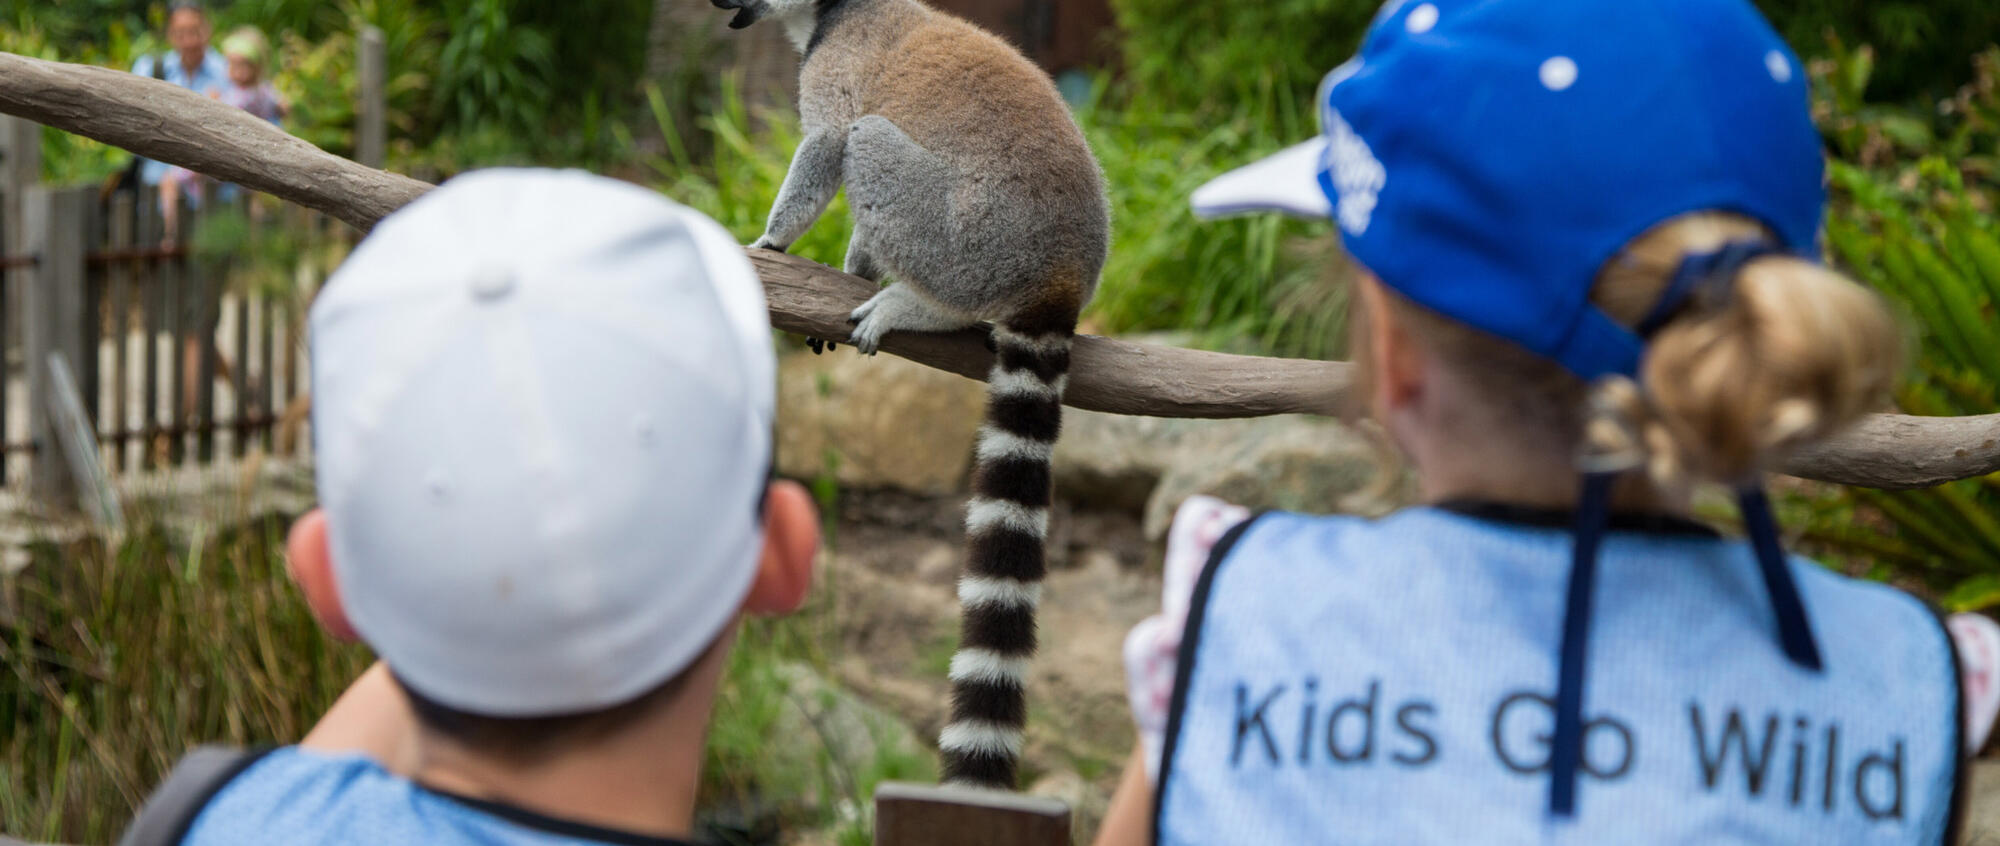 A rear view of two young children's heads looking at a lemur. One of the children wears a light blue hat, while the other wears a dark blue hat with a vest that reads 'kids go wild' on it.